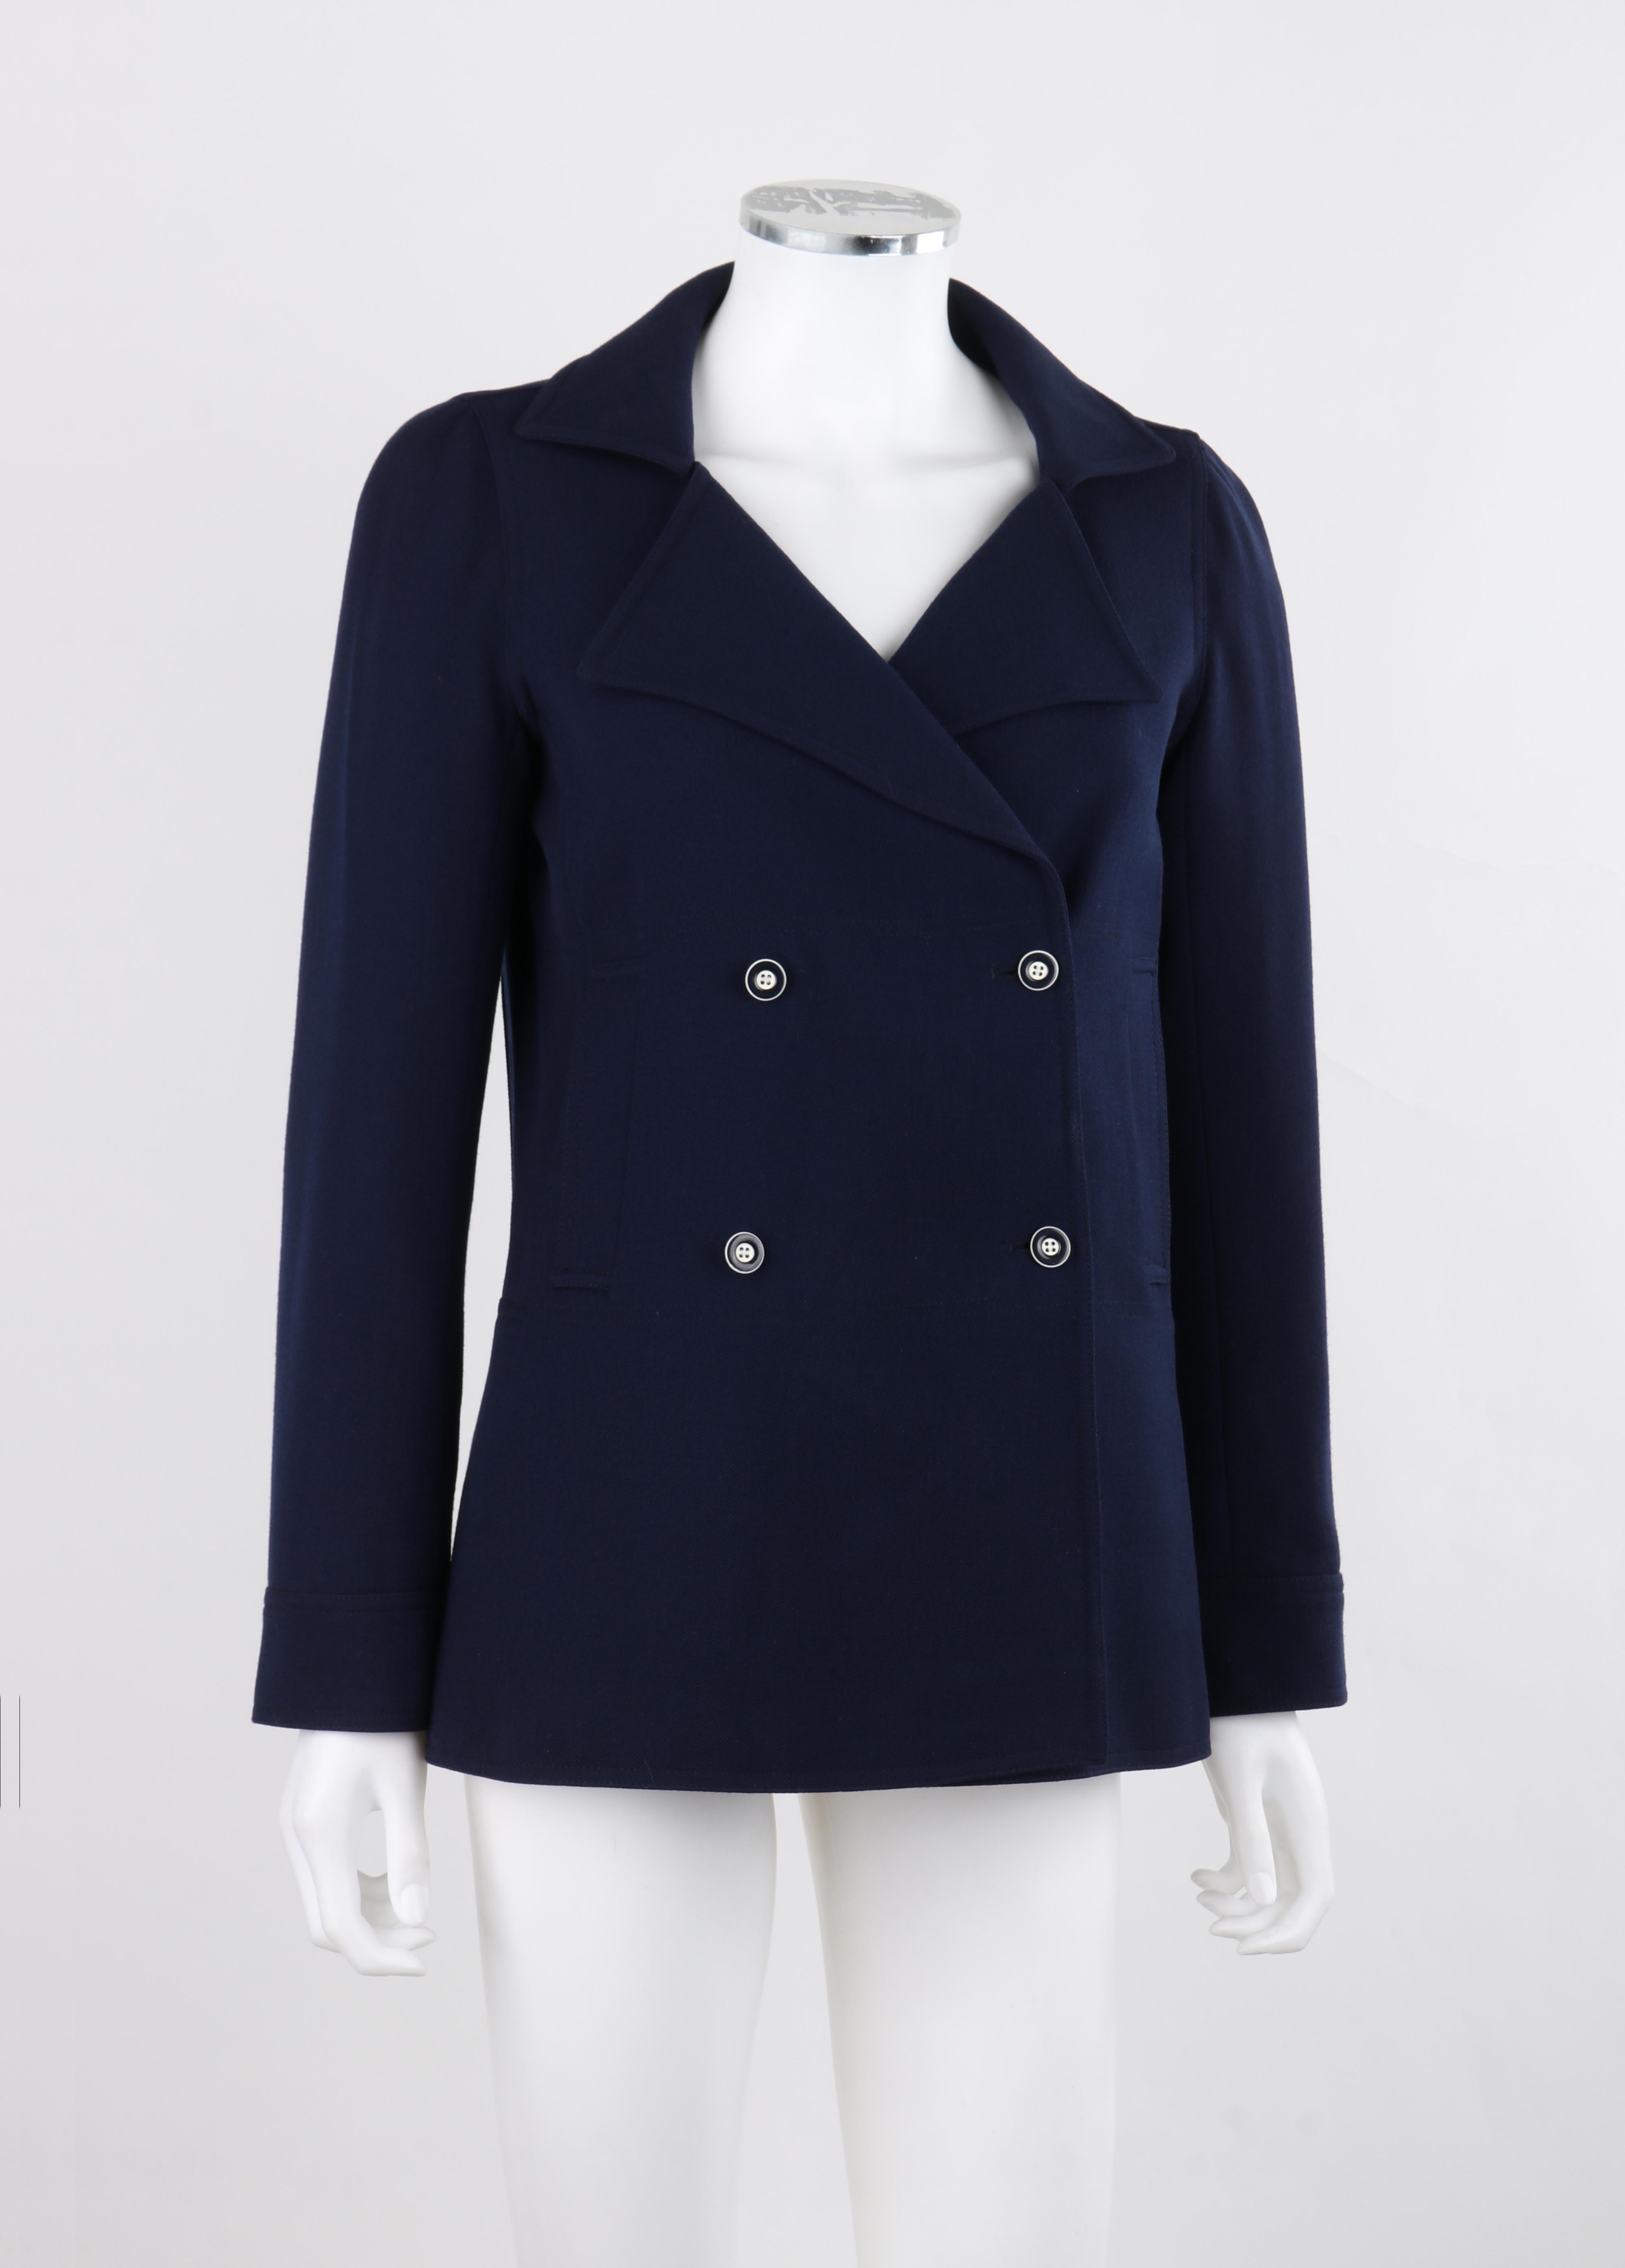 COURREGES PARIS c.1970's Vtg Navy Blue Wool Double Breasted Blazer Jacket  In Good Condition For Sale In Thiensville, WI